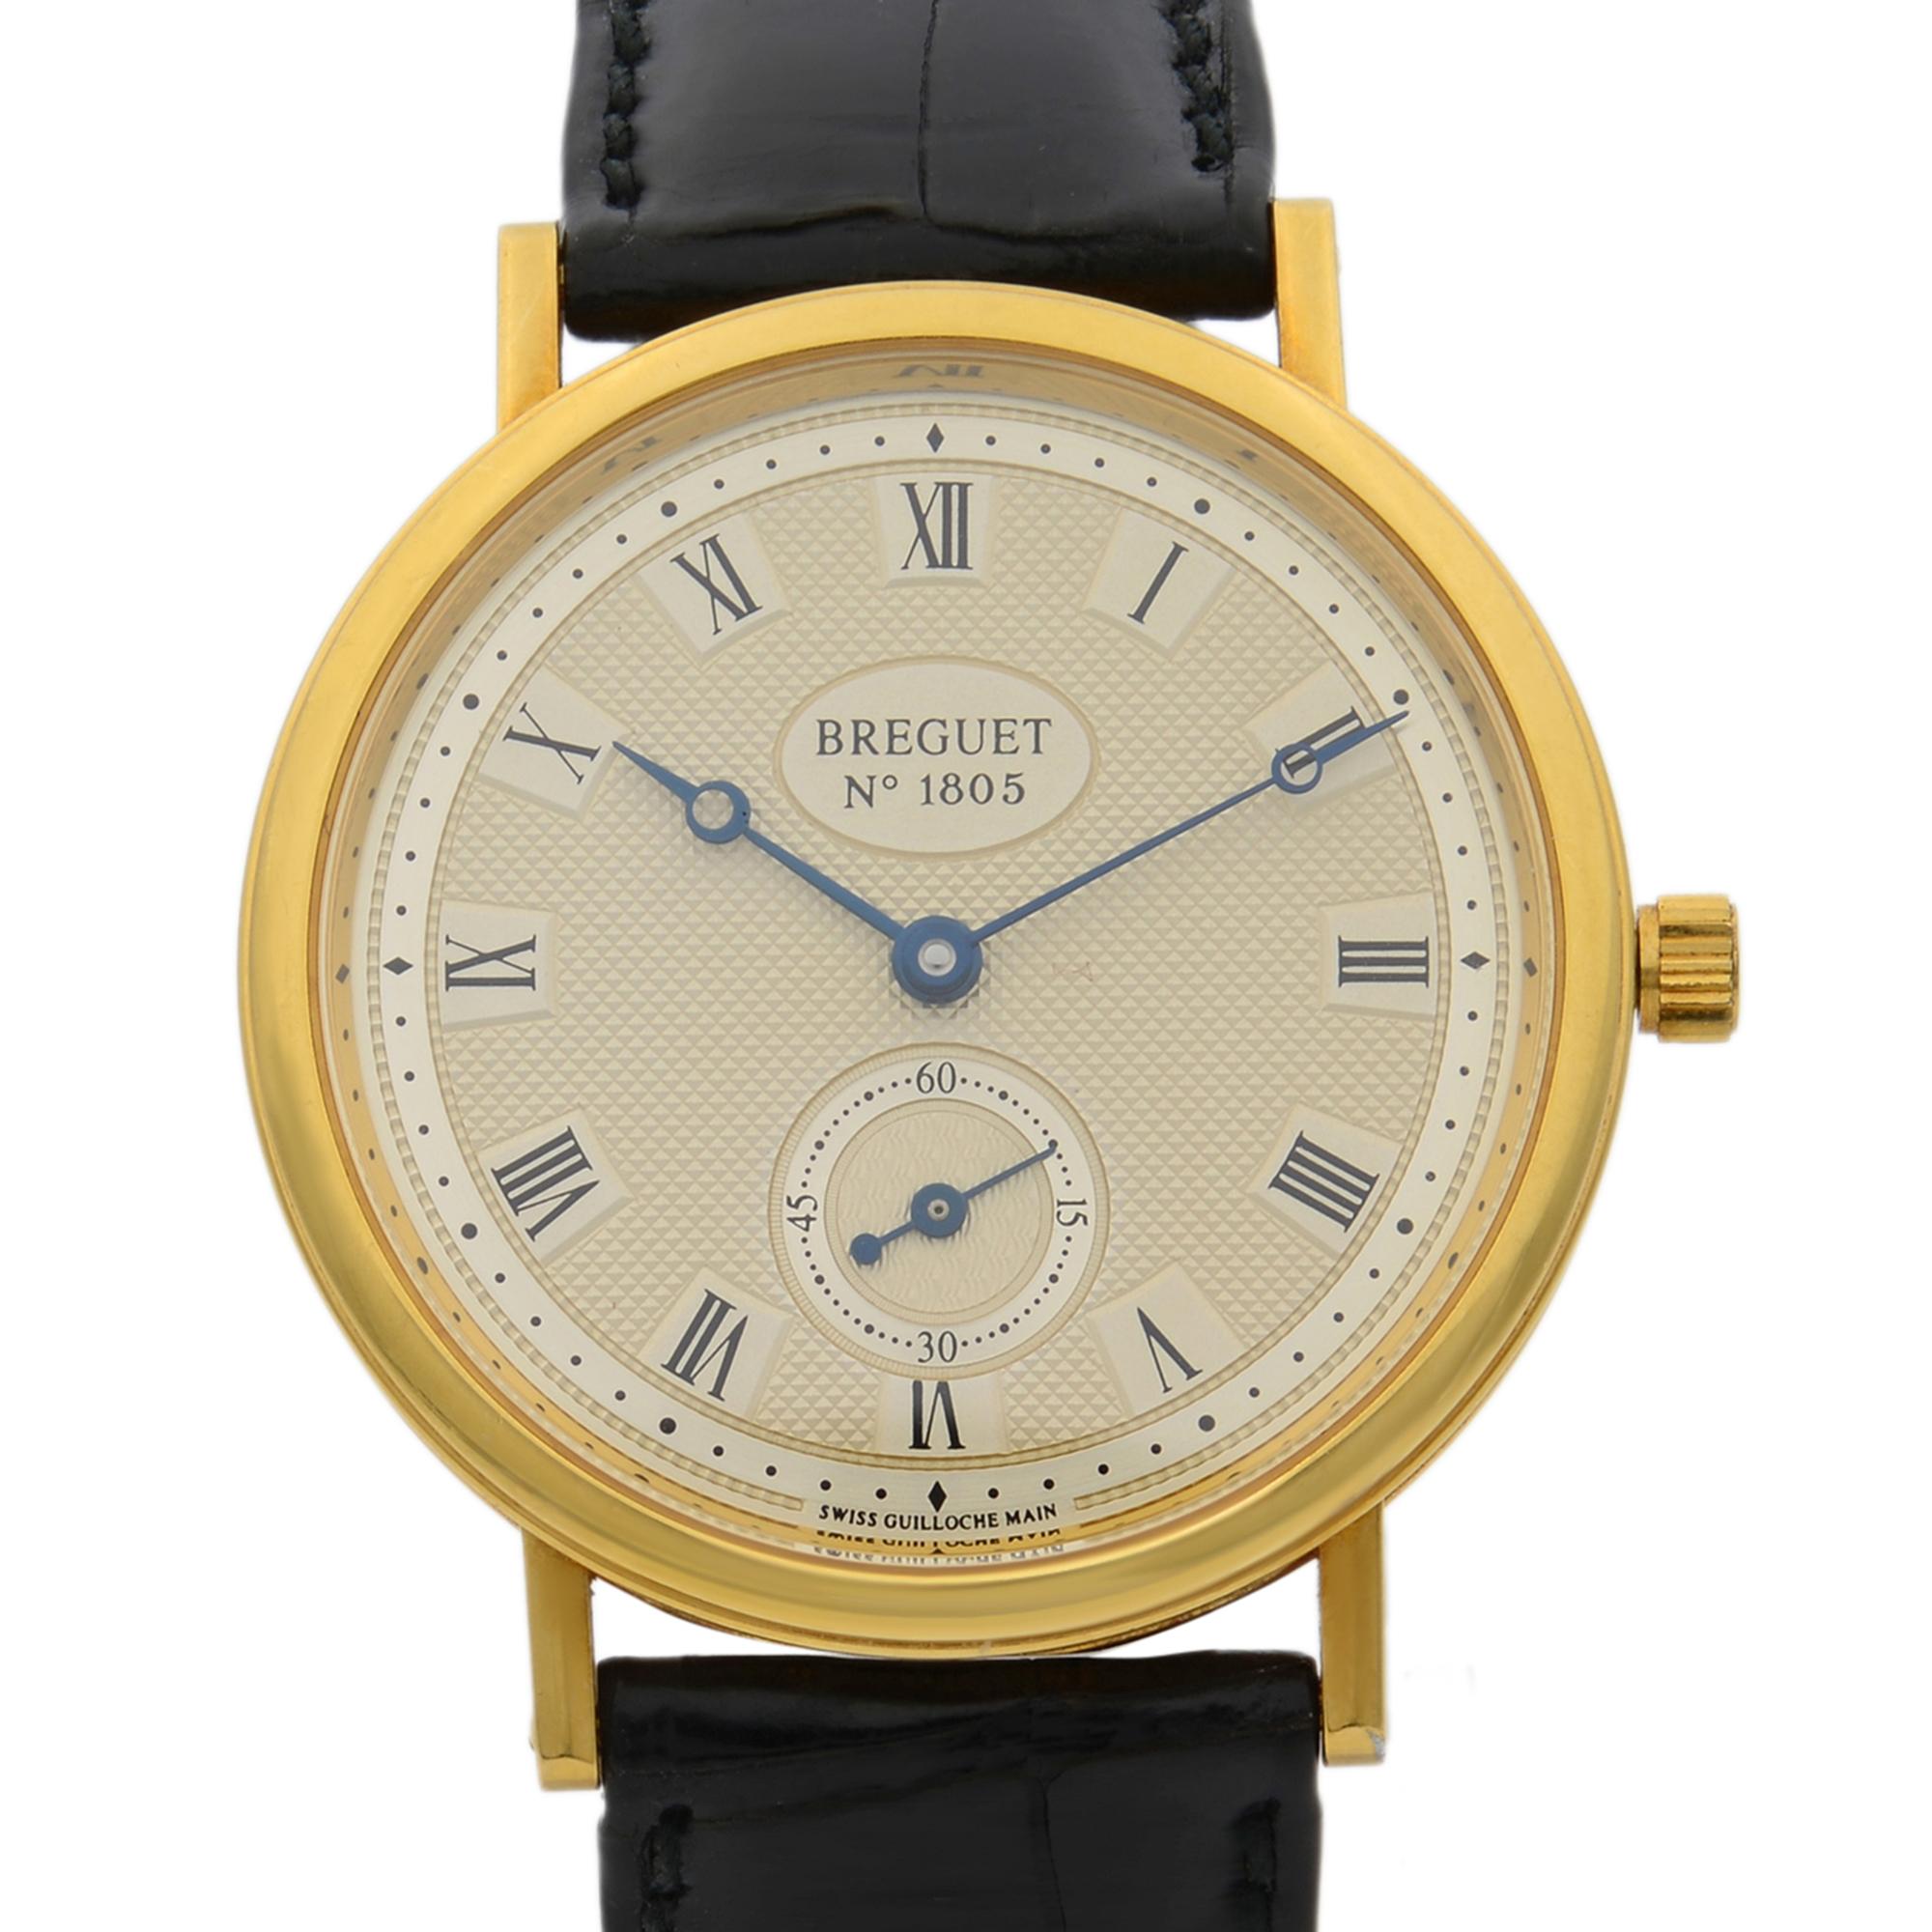 This pre-owned Breguet Classique  3910BA/15/286 is a beautiful men's timepiece that is powered by mechanical (hand-winding) movement which is cased in a yellow gold case. It has a round shape face, small seconds subdial dial and has hand roman